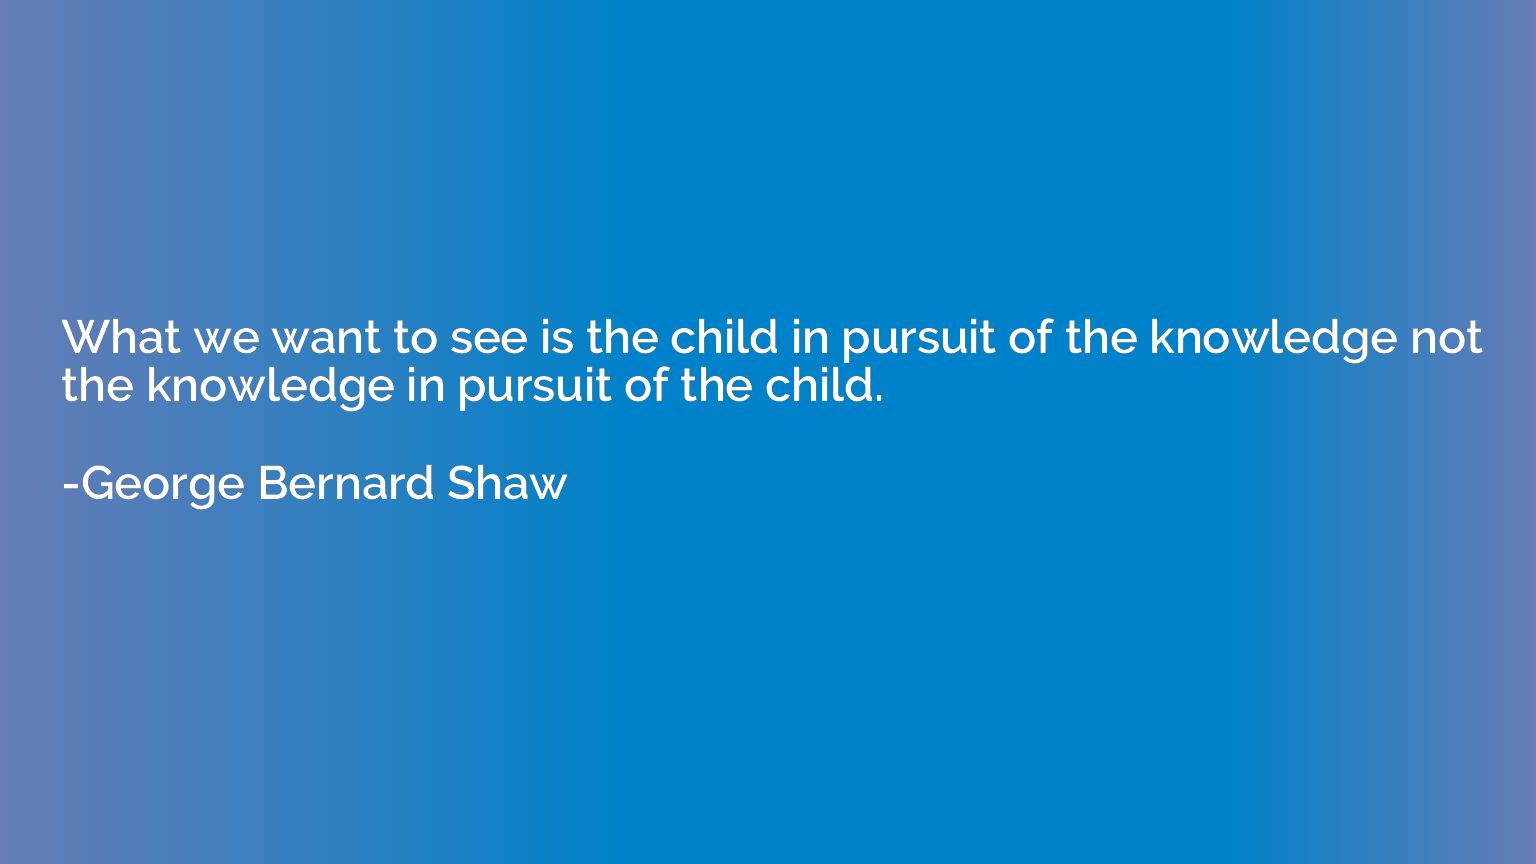 What we want to see is the child in pursuit of the knowledge